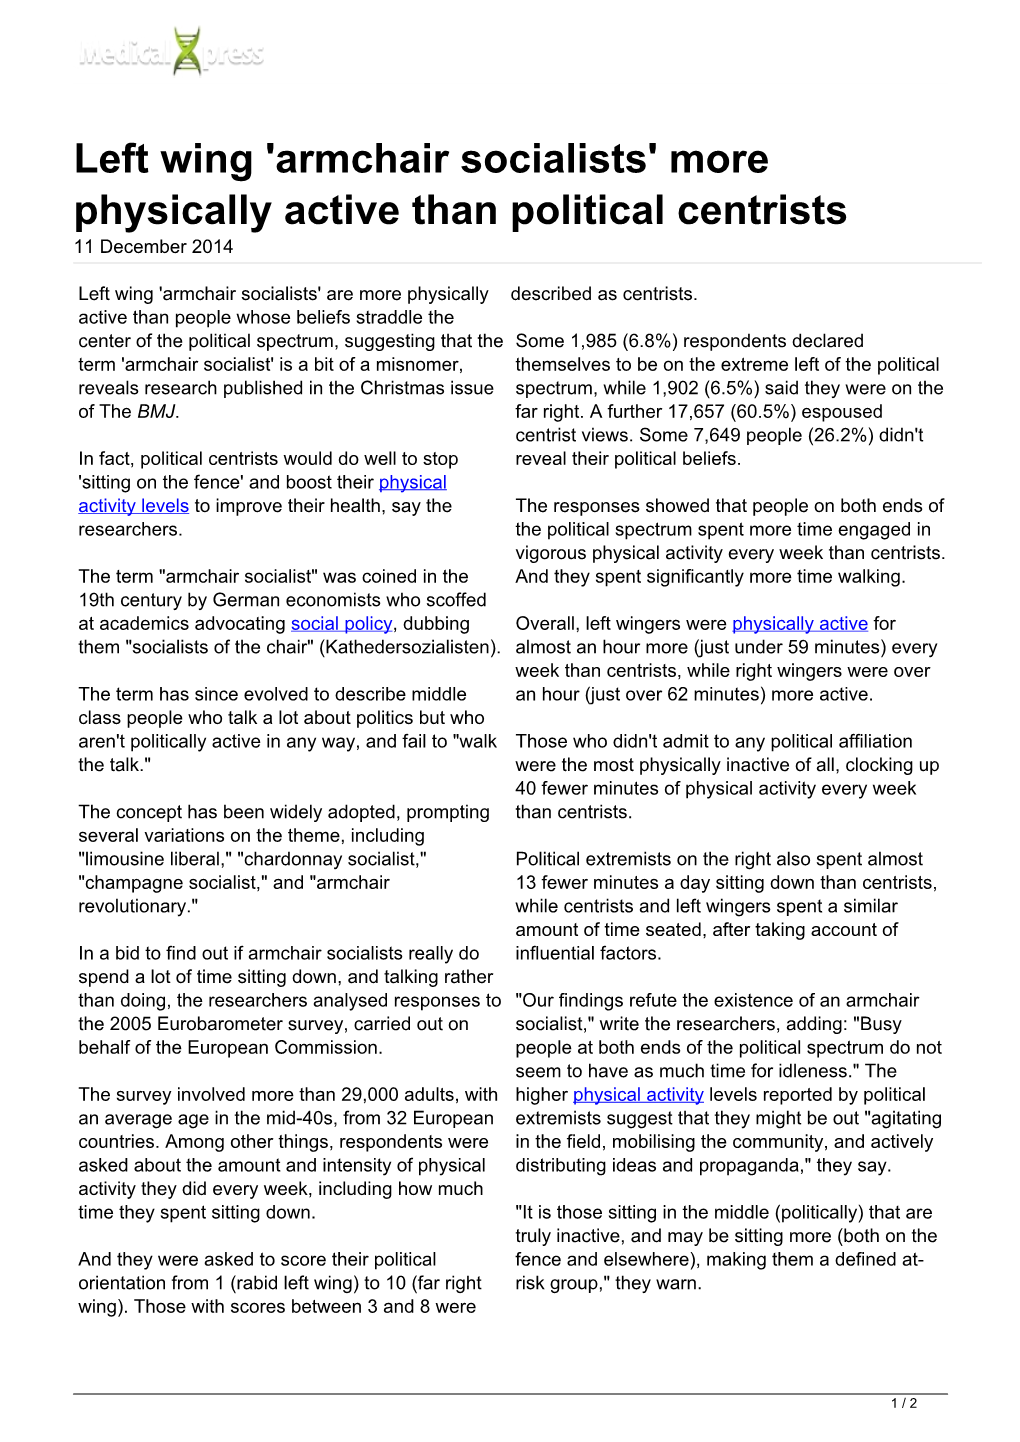 Left Wing 'Armchair Socialists' More Physically Active Than Political Centrists 11 December 2014